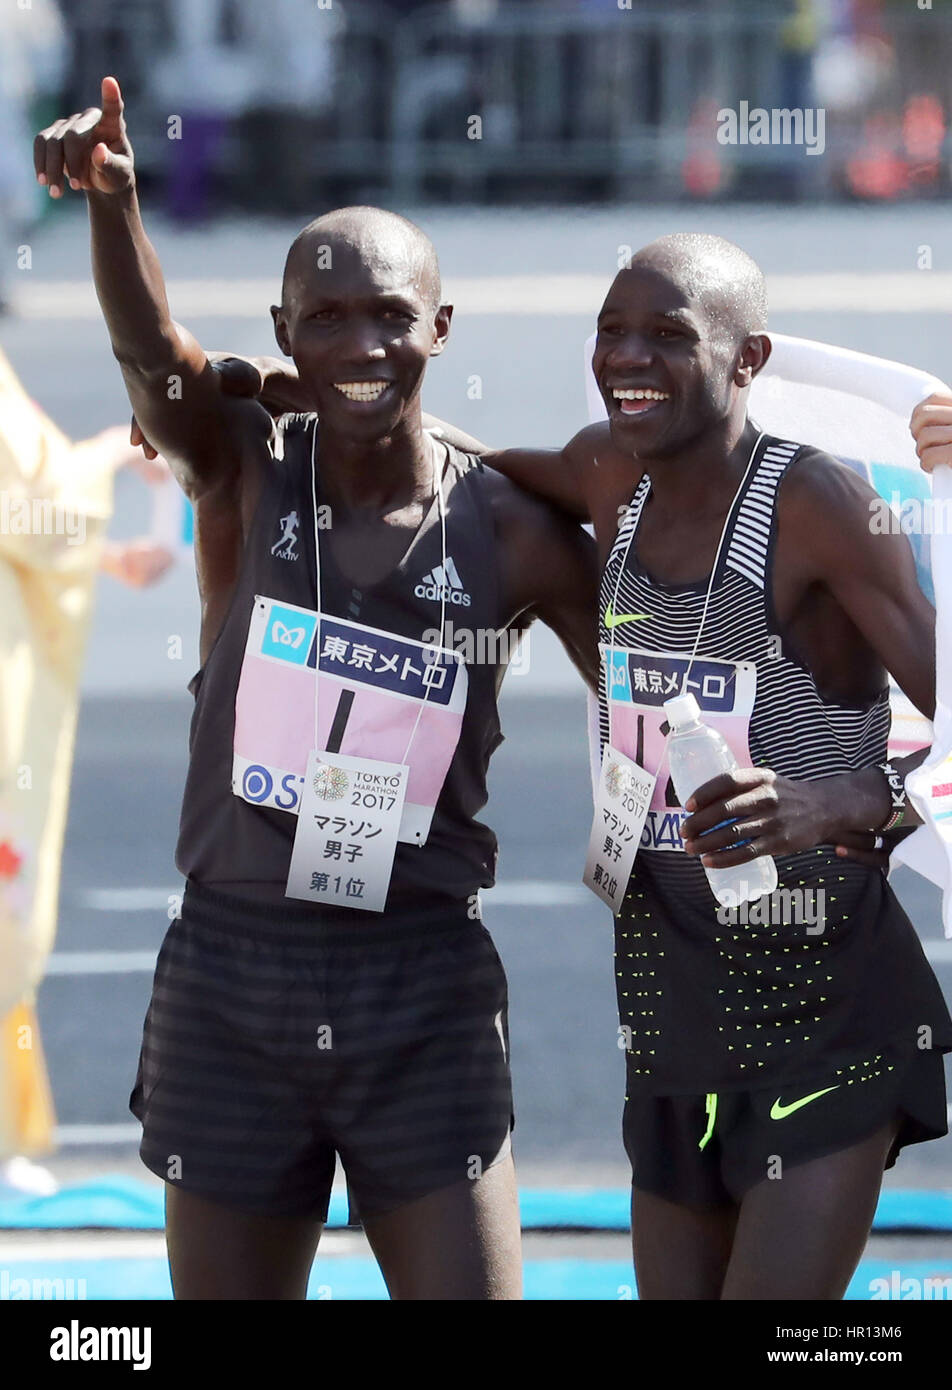 Tokyo, Japan. 26th Feb, 2017. Wilson Kipsang of Kenya (L) celebrates with his compatriot Gideon Kipketer (R) as they crossed the finish line of the Tokyo Marathon in Tokyo on Sunday, February 26, 2017. Kipsang won the race with a time of 2 hours 3 minutes 58 seconds while Kipketer finished the second and Chumba finished the third. Credit: Yoshio Tsunoda/AFLO/Alamy Live News Stock Photo